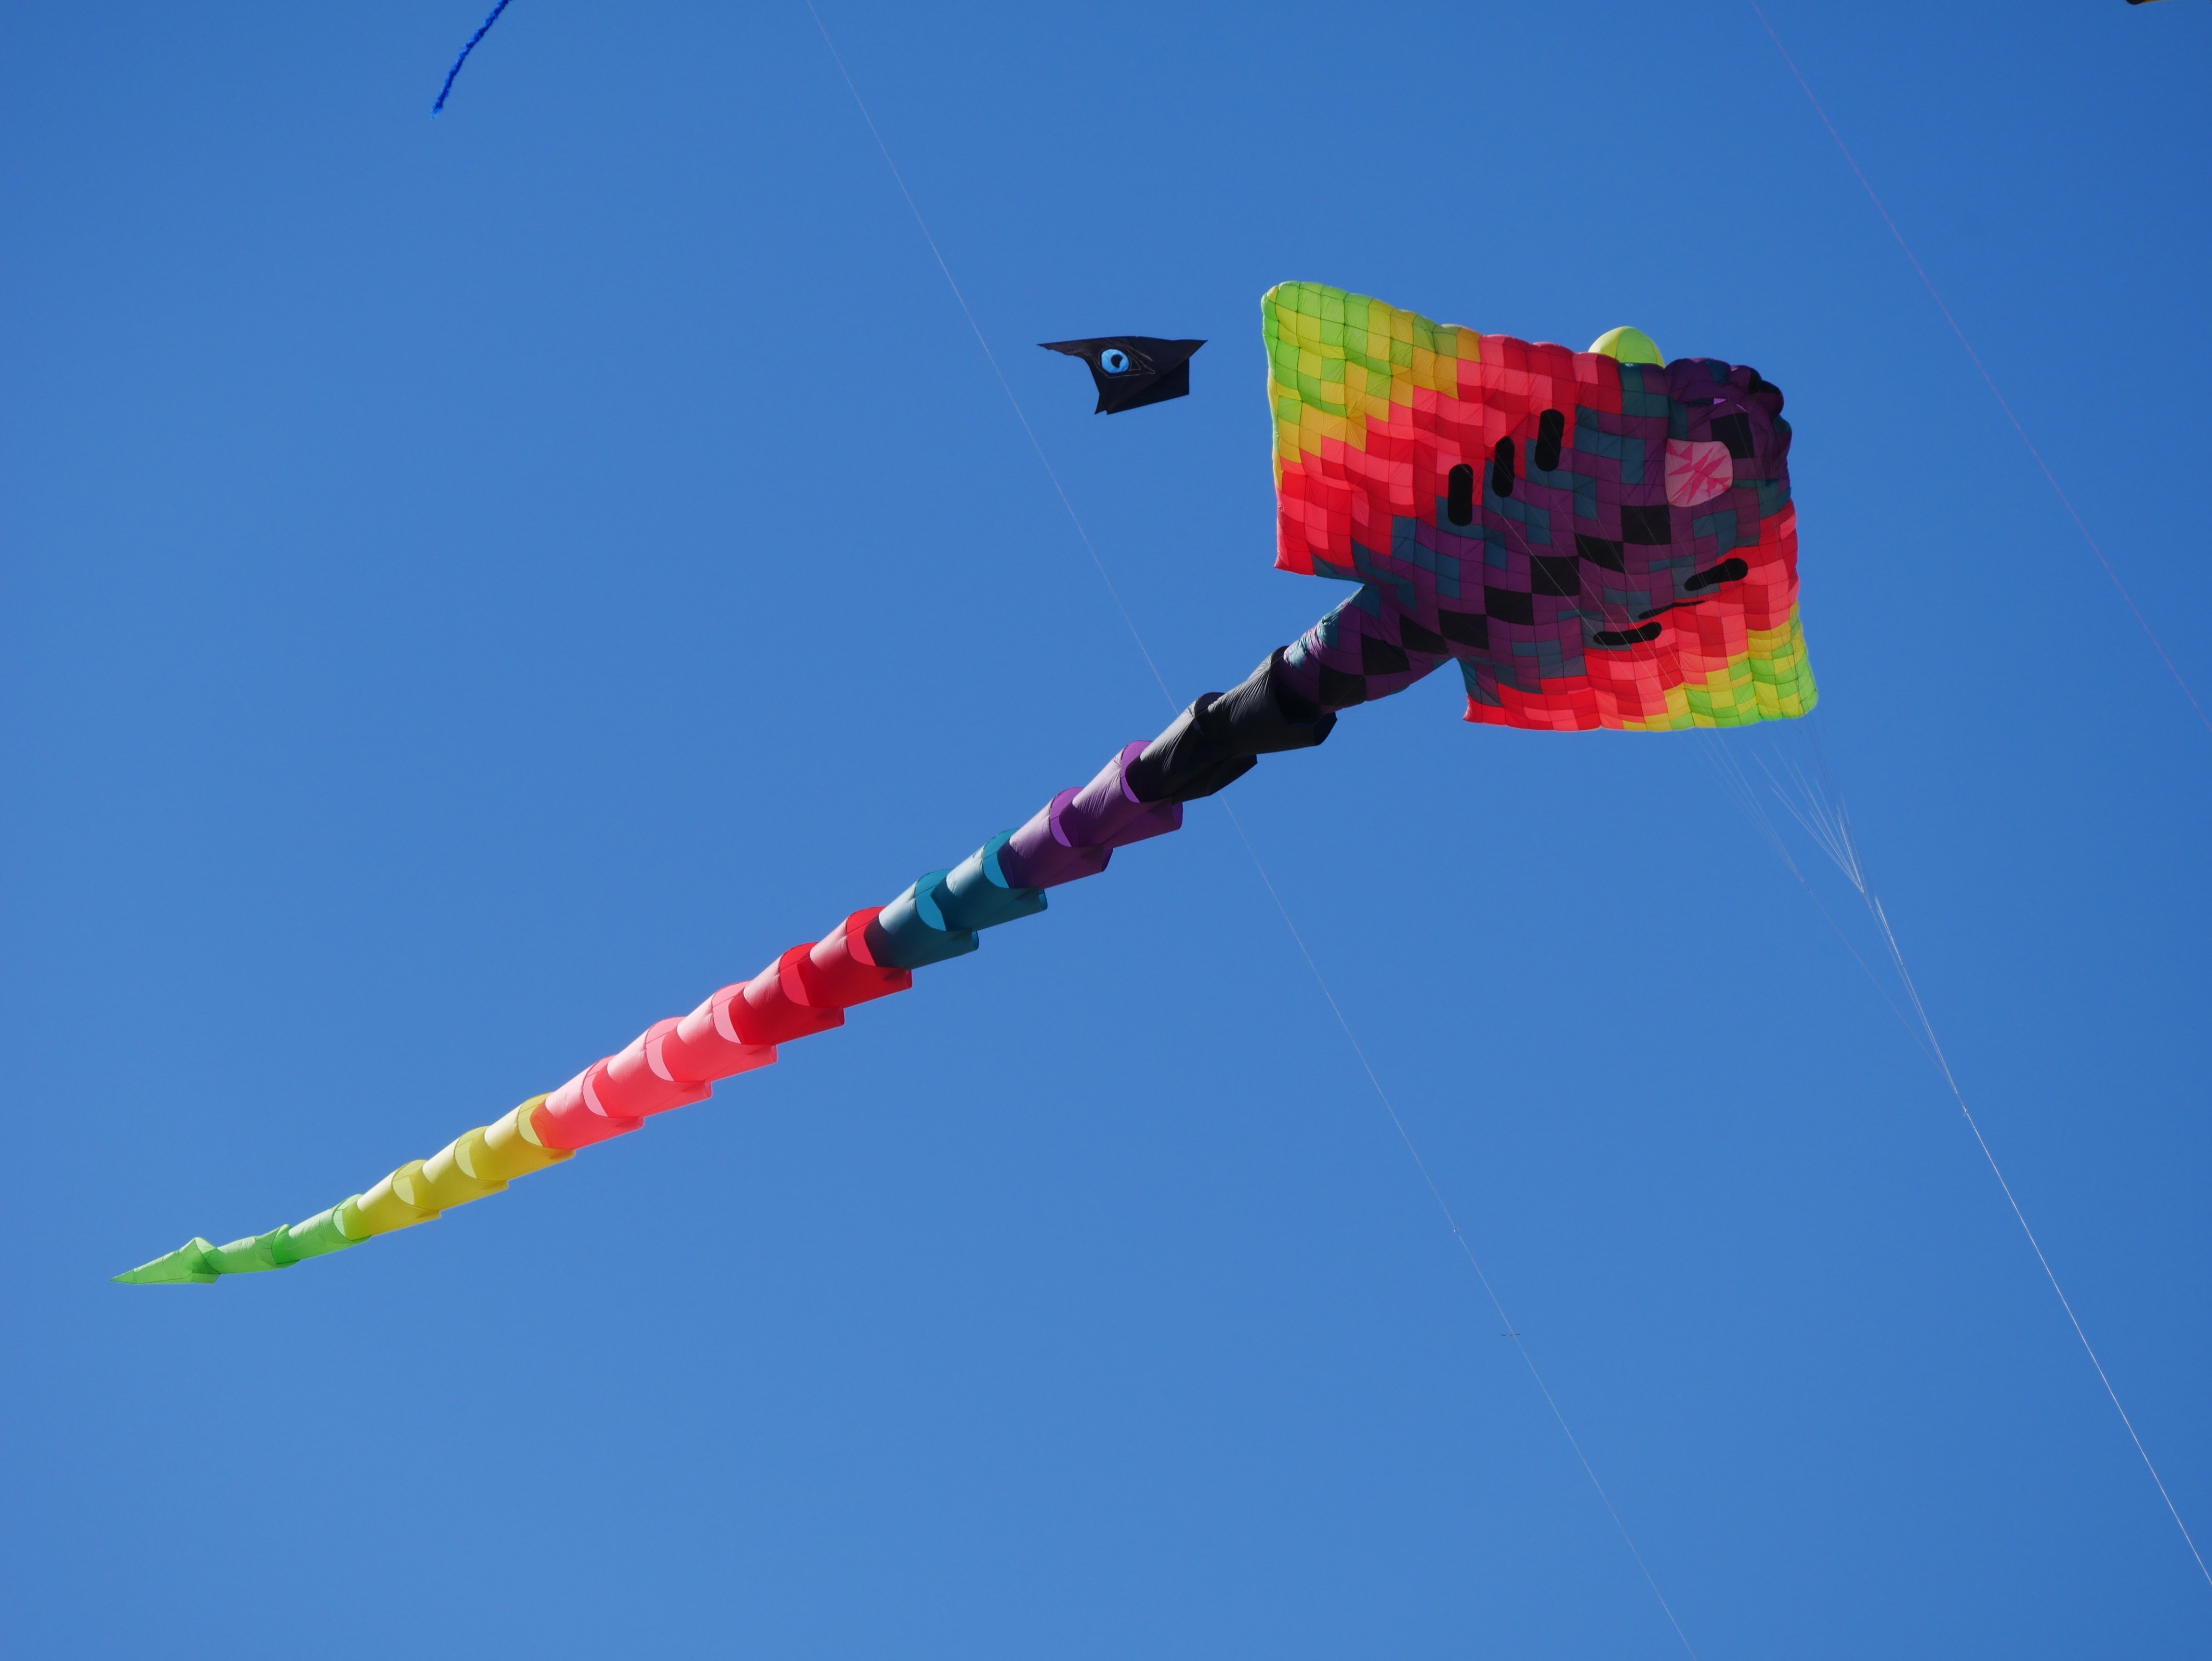 man made, kite, colorful, colors, flying